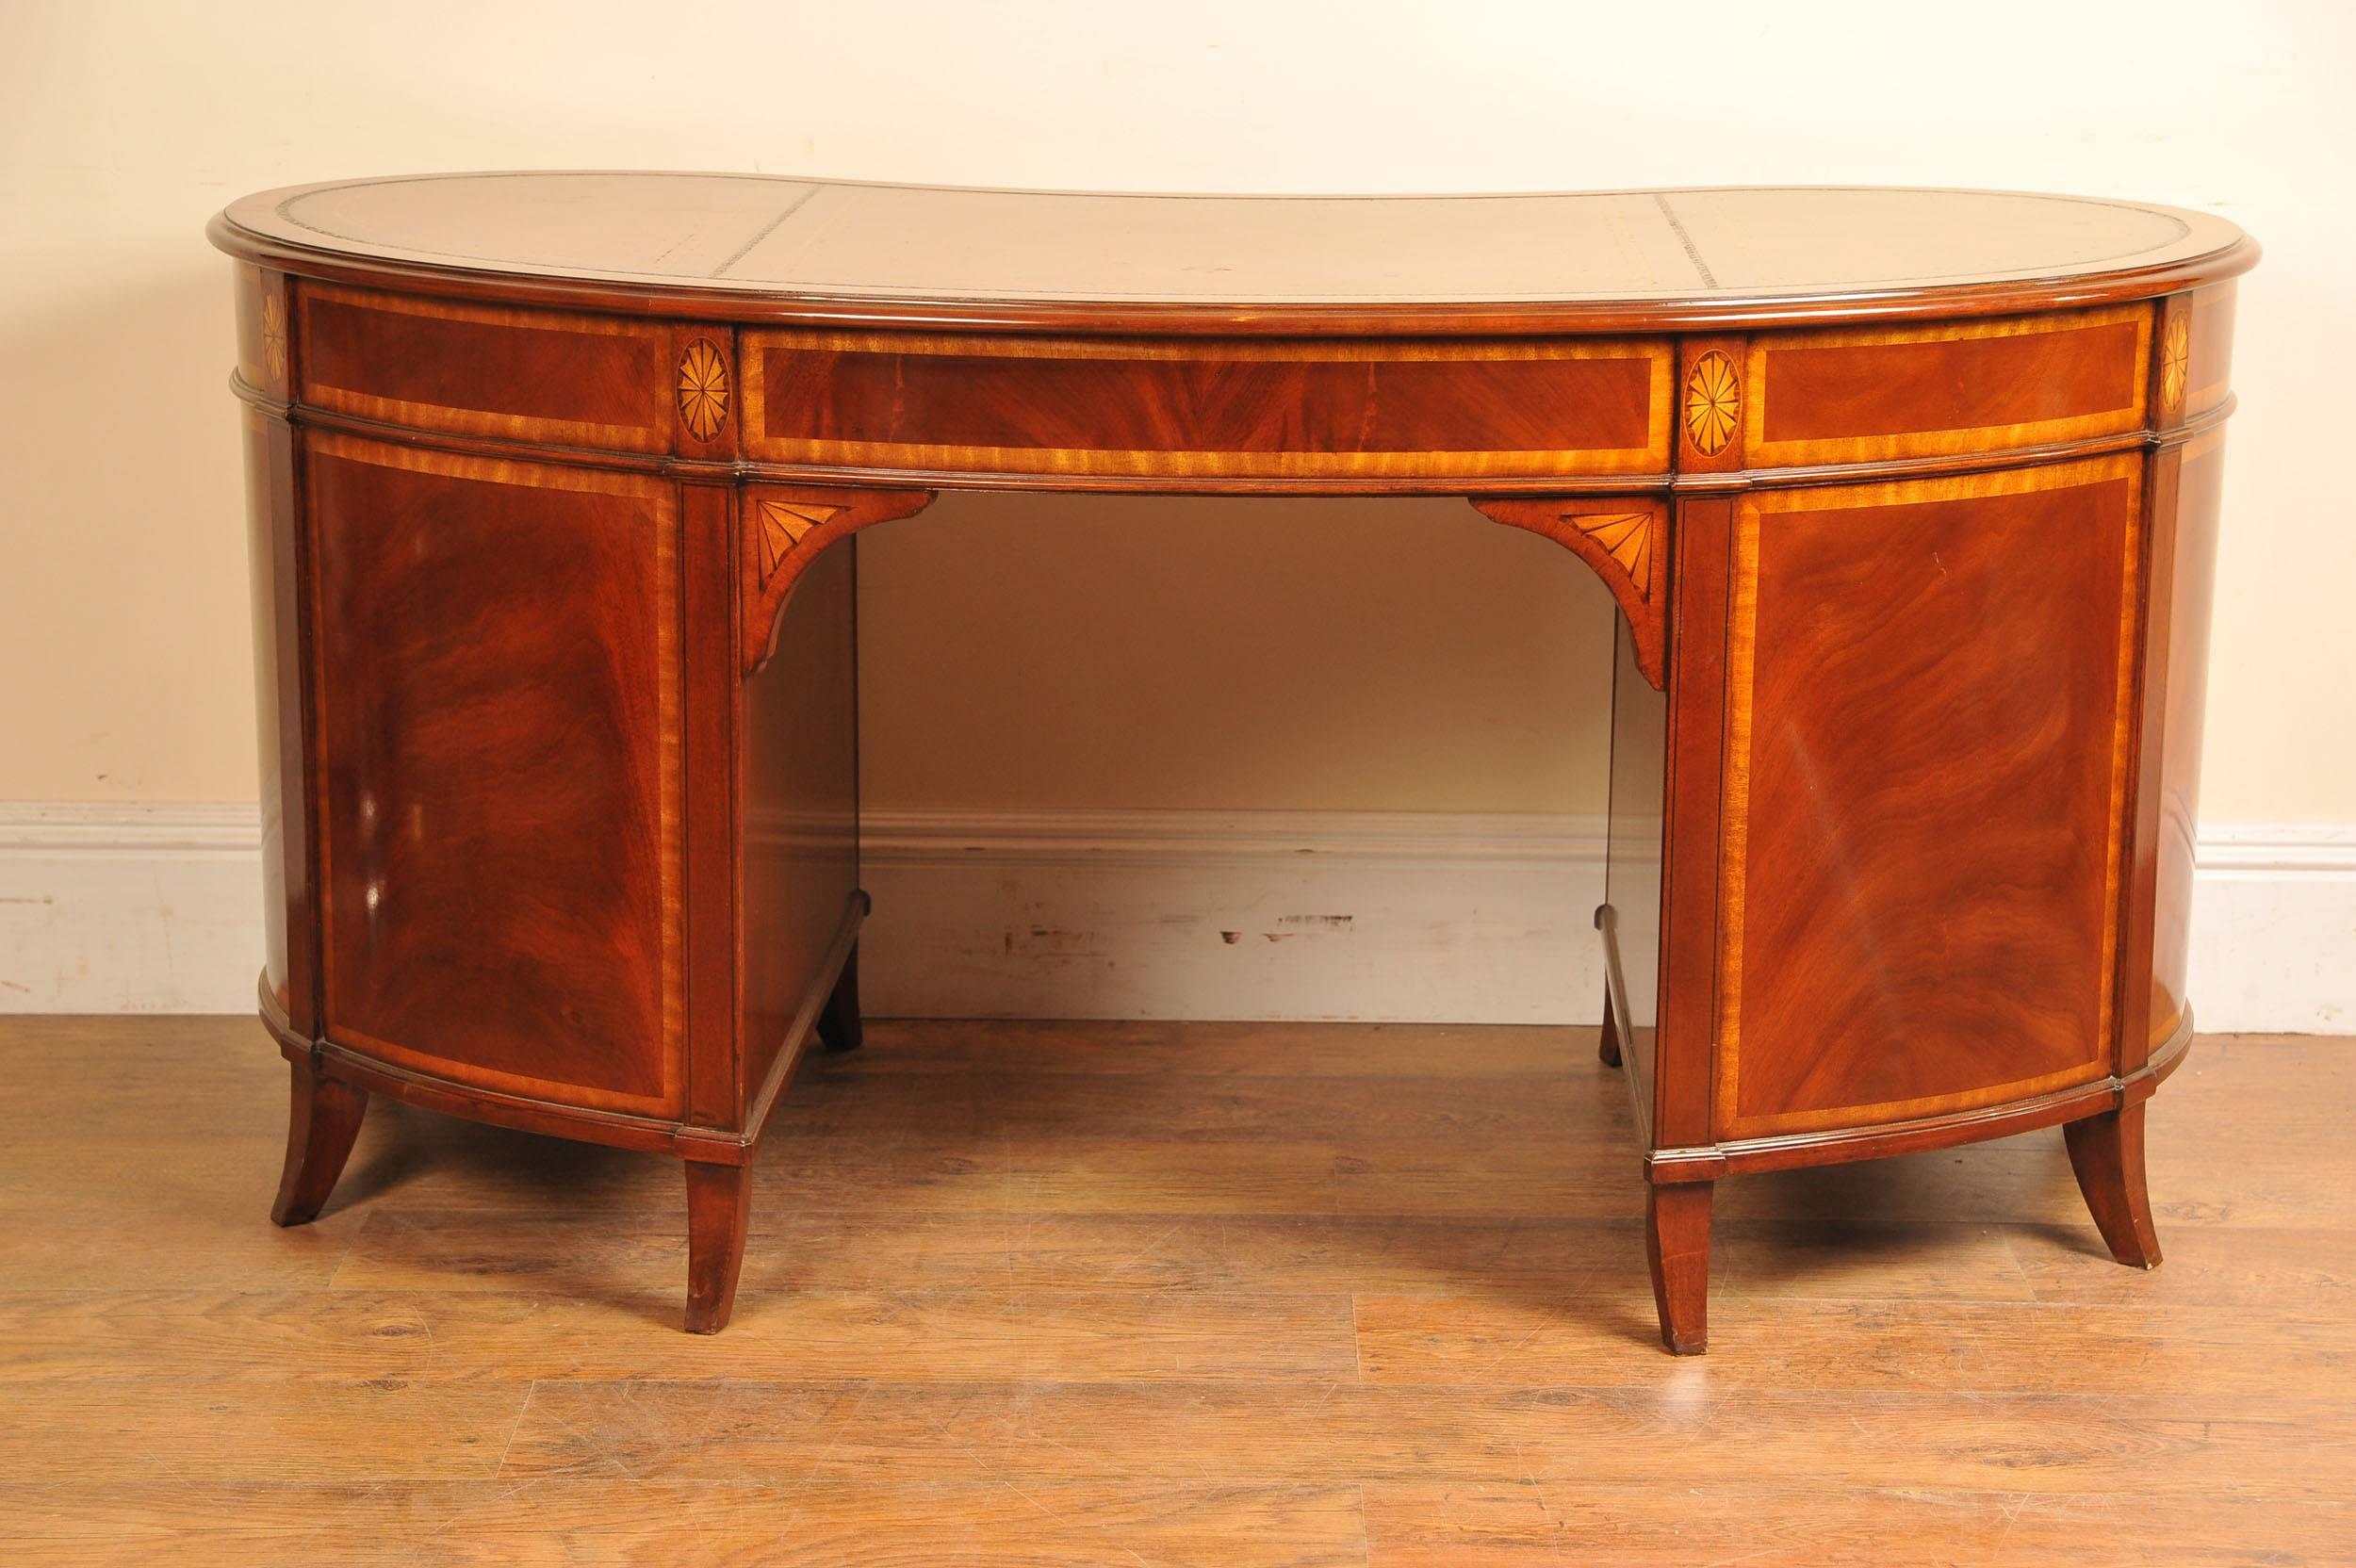 You are viewing a gorgeous kidney bean shaped desk in the English Regency style and handcrafted from the finest, sumptuous mahogany. The desk is covered in a lovely brown tooled leather with gold leaf banding to the perimeter and it is very